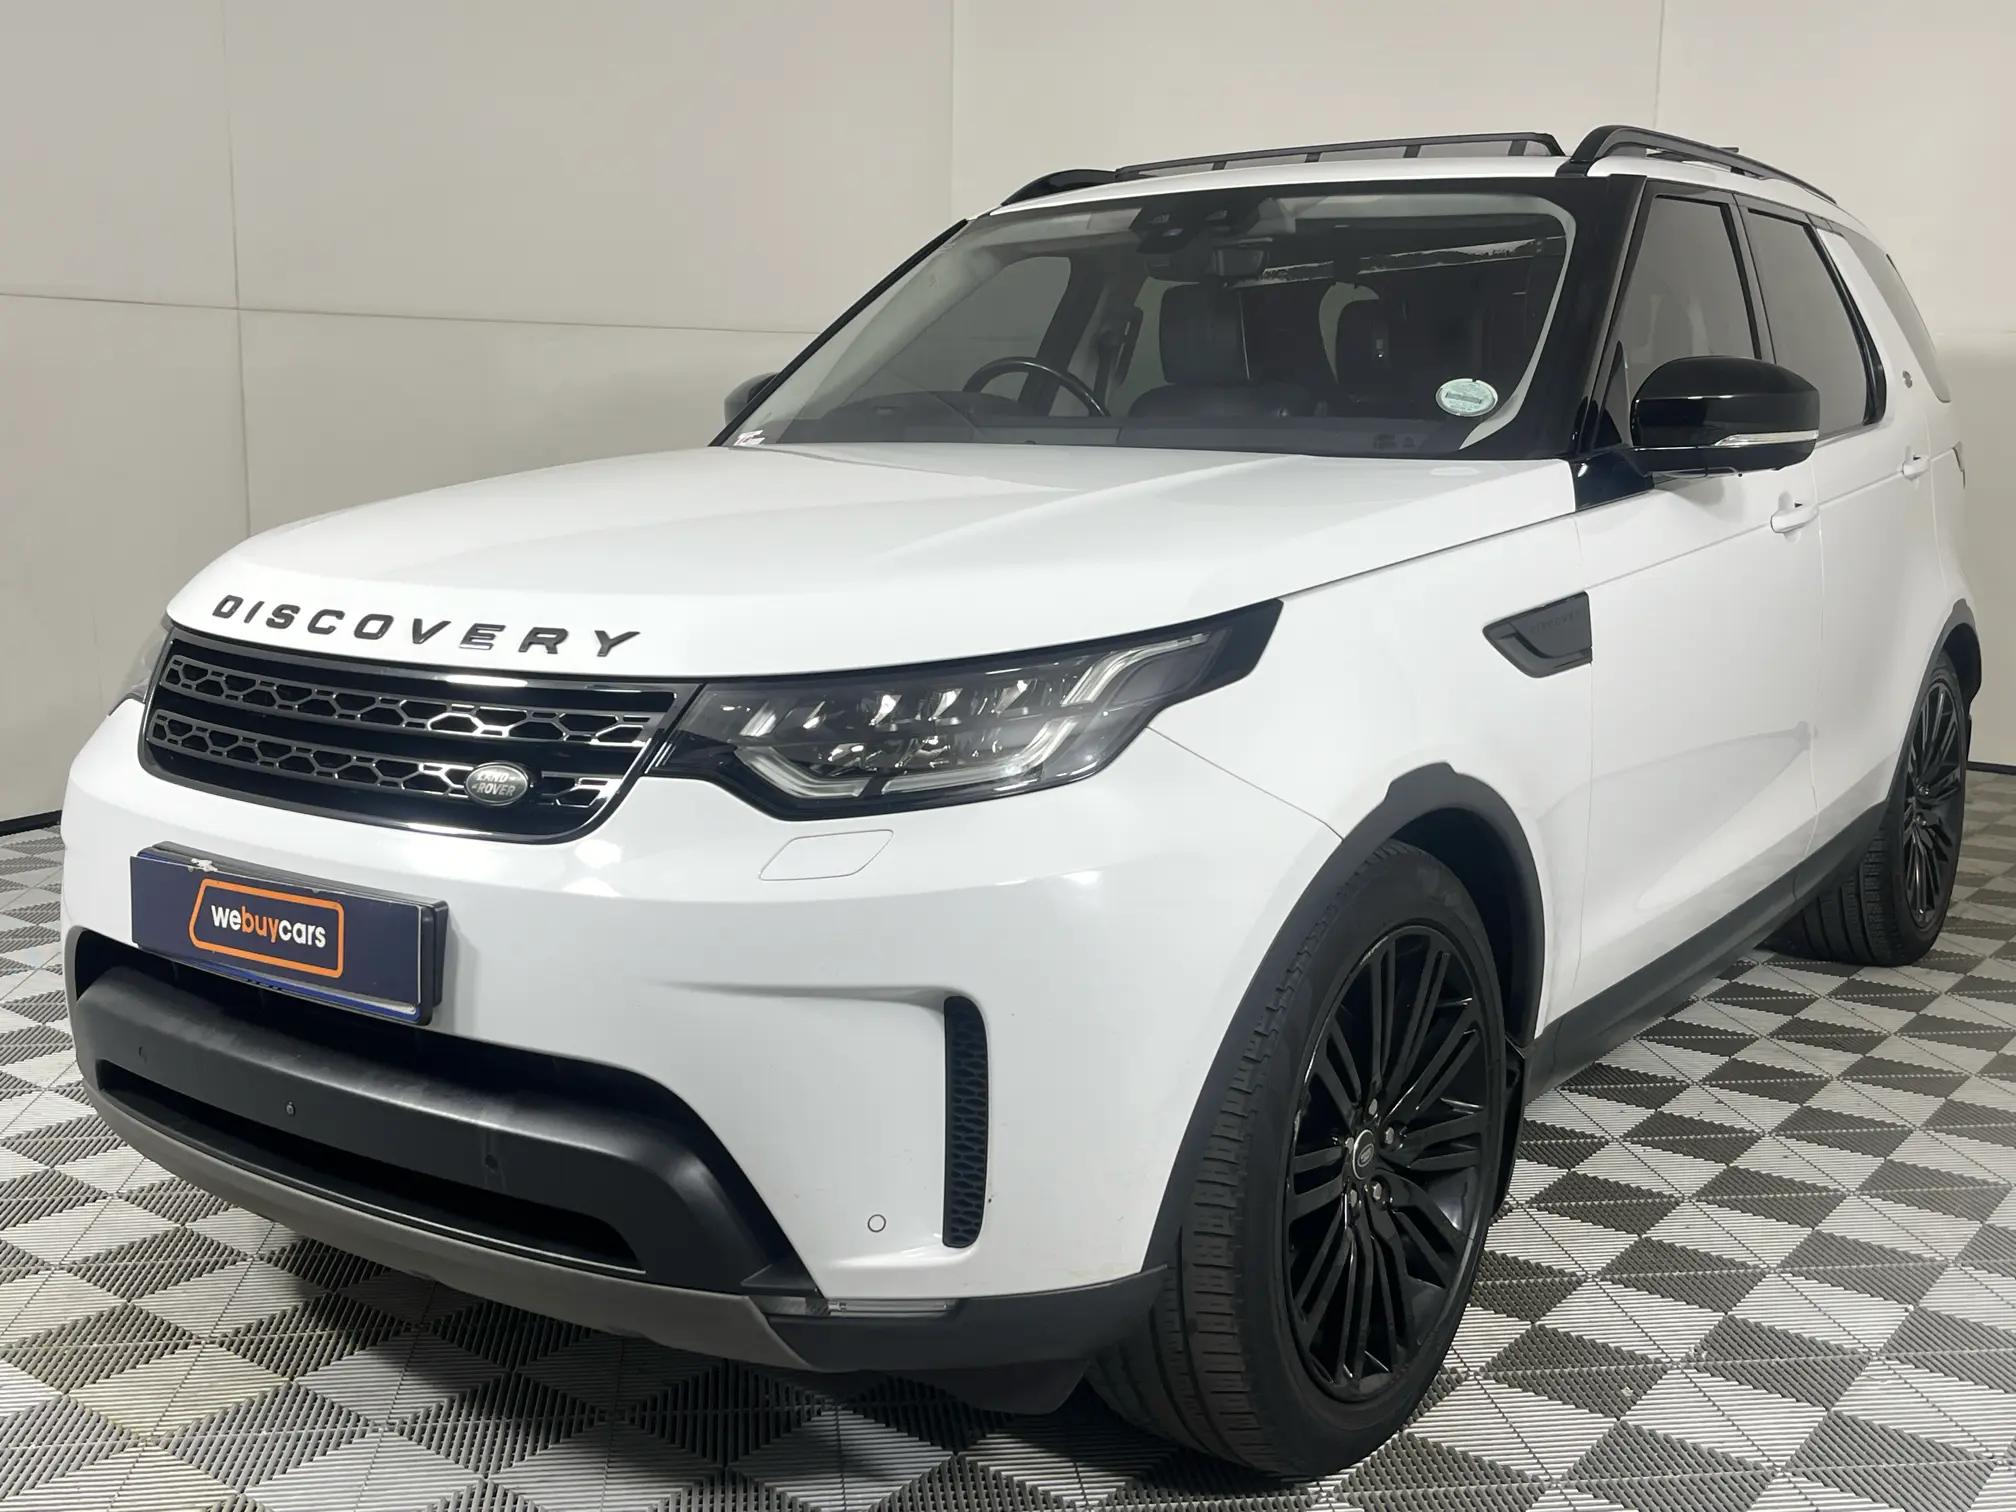 Land Rover Discovery 5 3.0 TD6 HSE Luxury